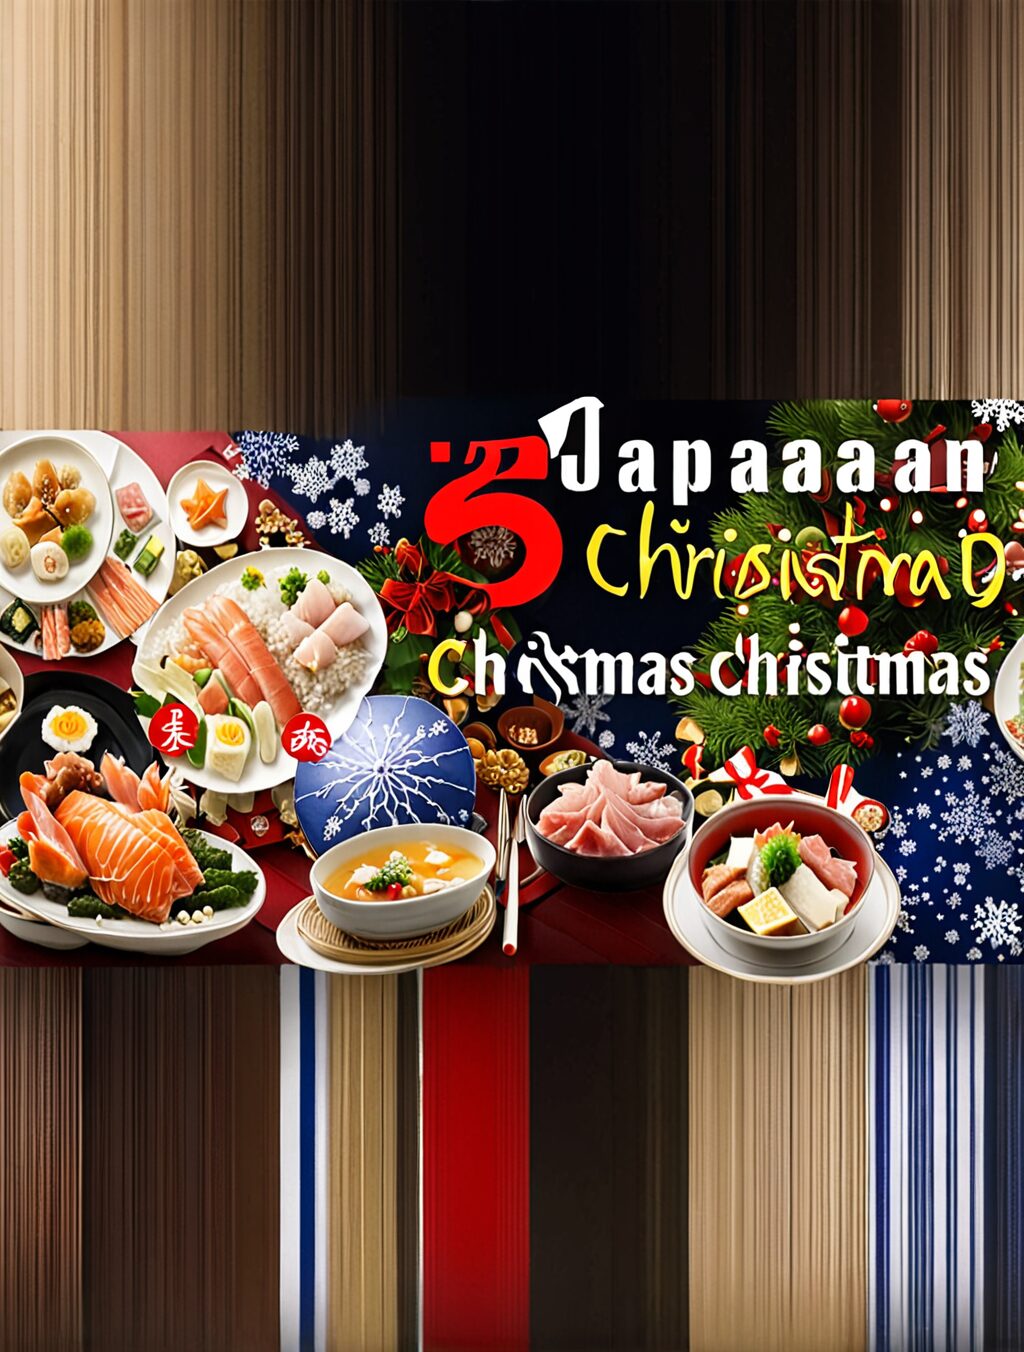 what do many people in japan eat on christmas day